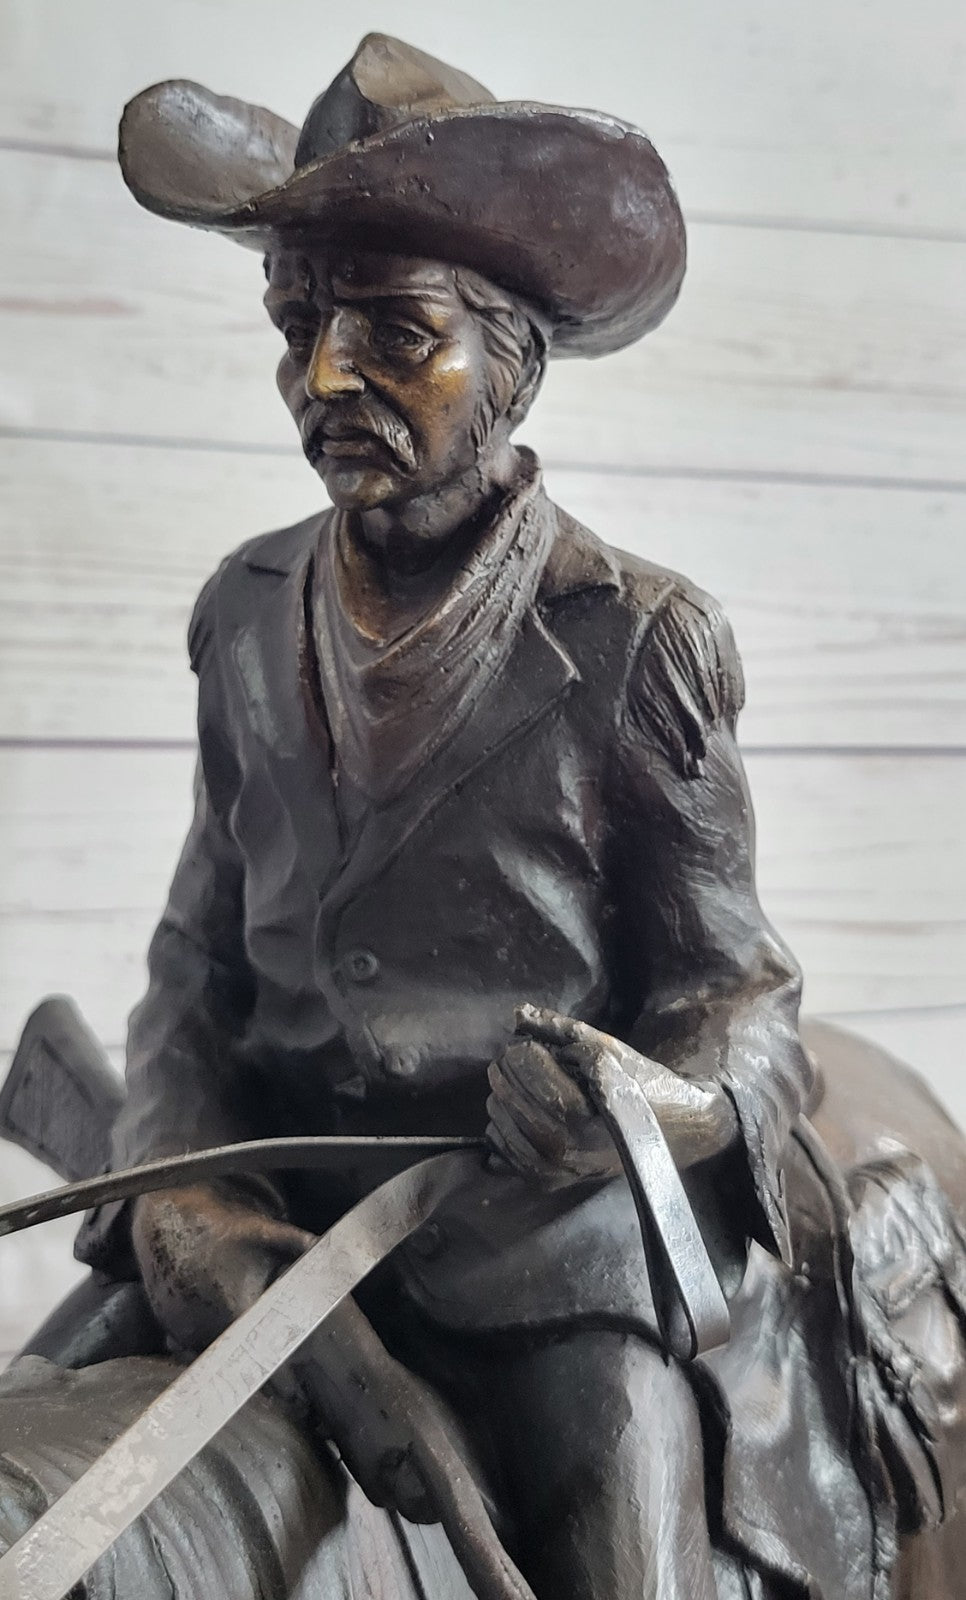 Remington 100% Bronze cowboy with Rifle in hand on horse good patina design